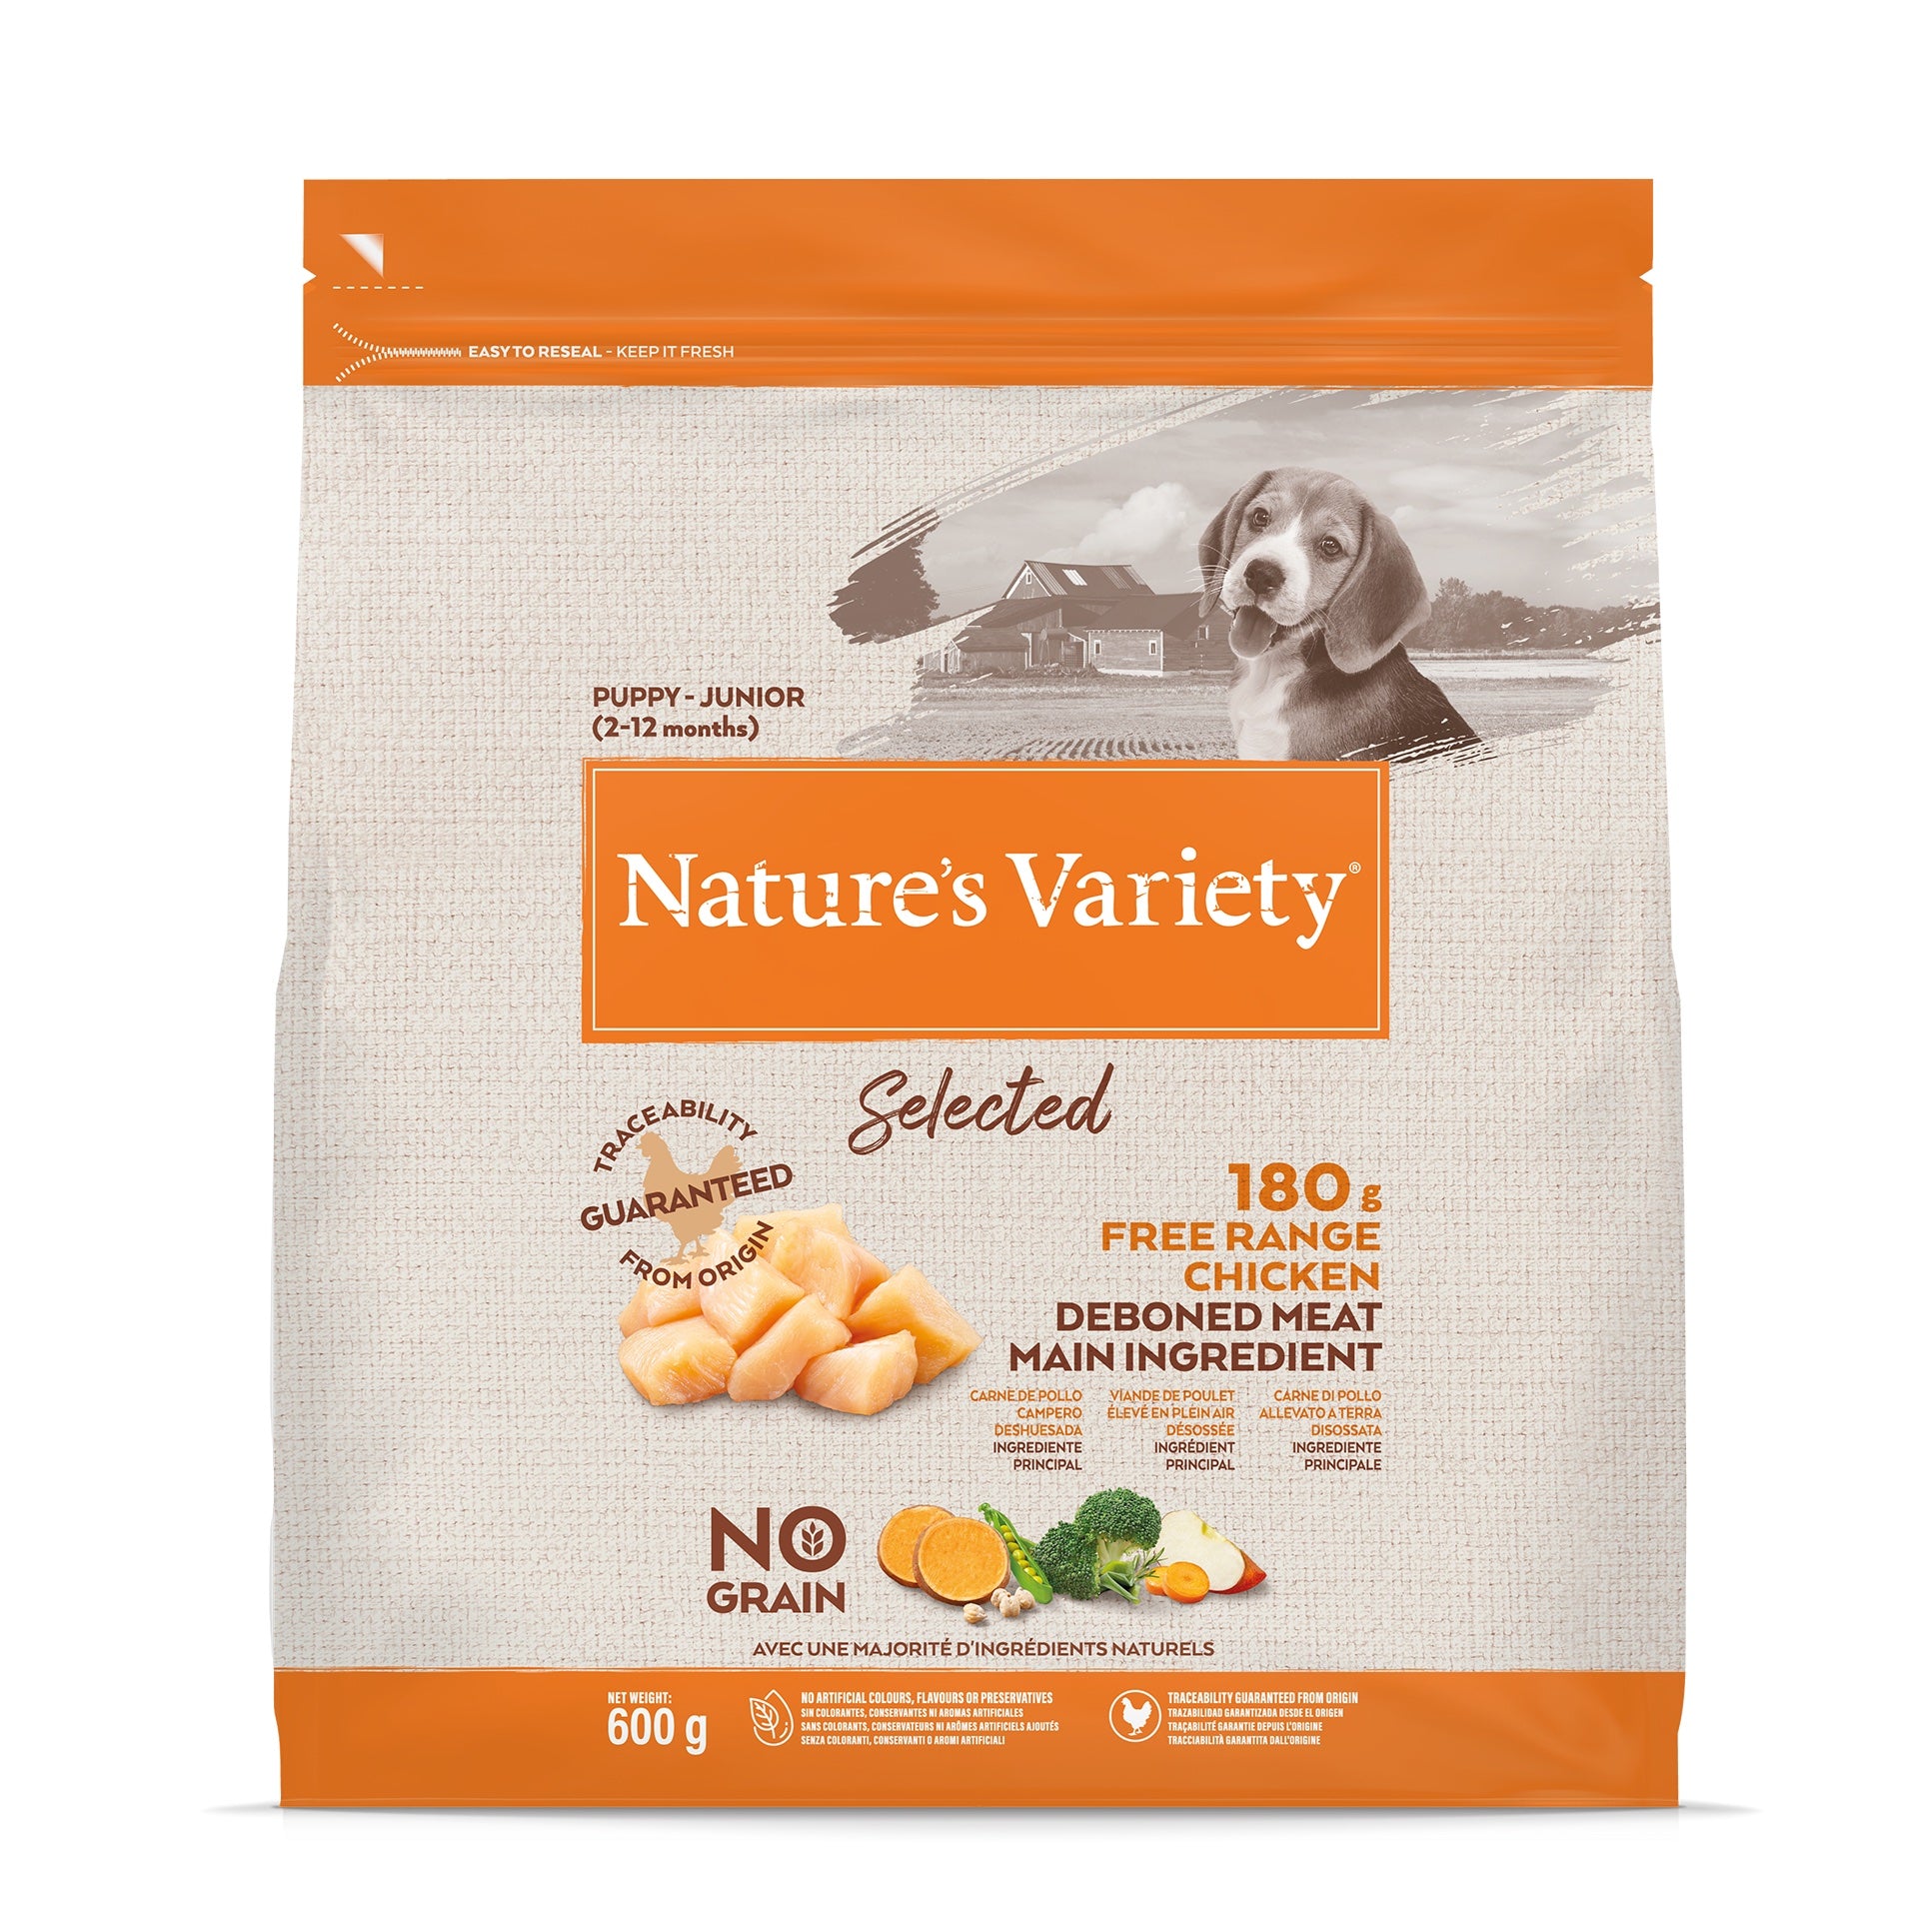 Natures Variety Selected Chicken Puppy/Junior